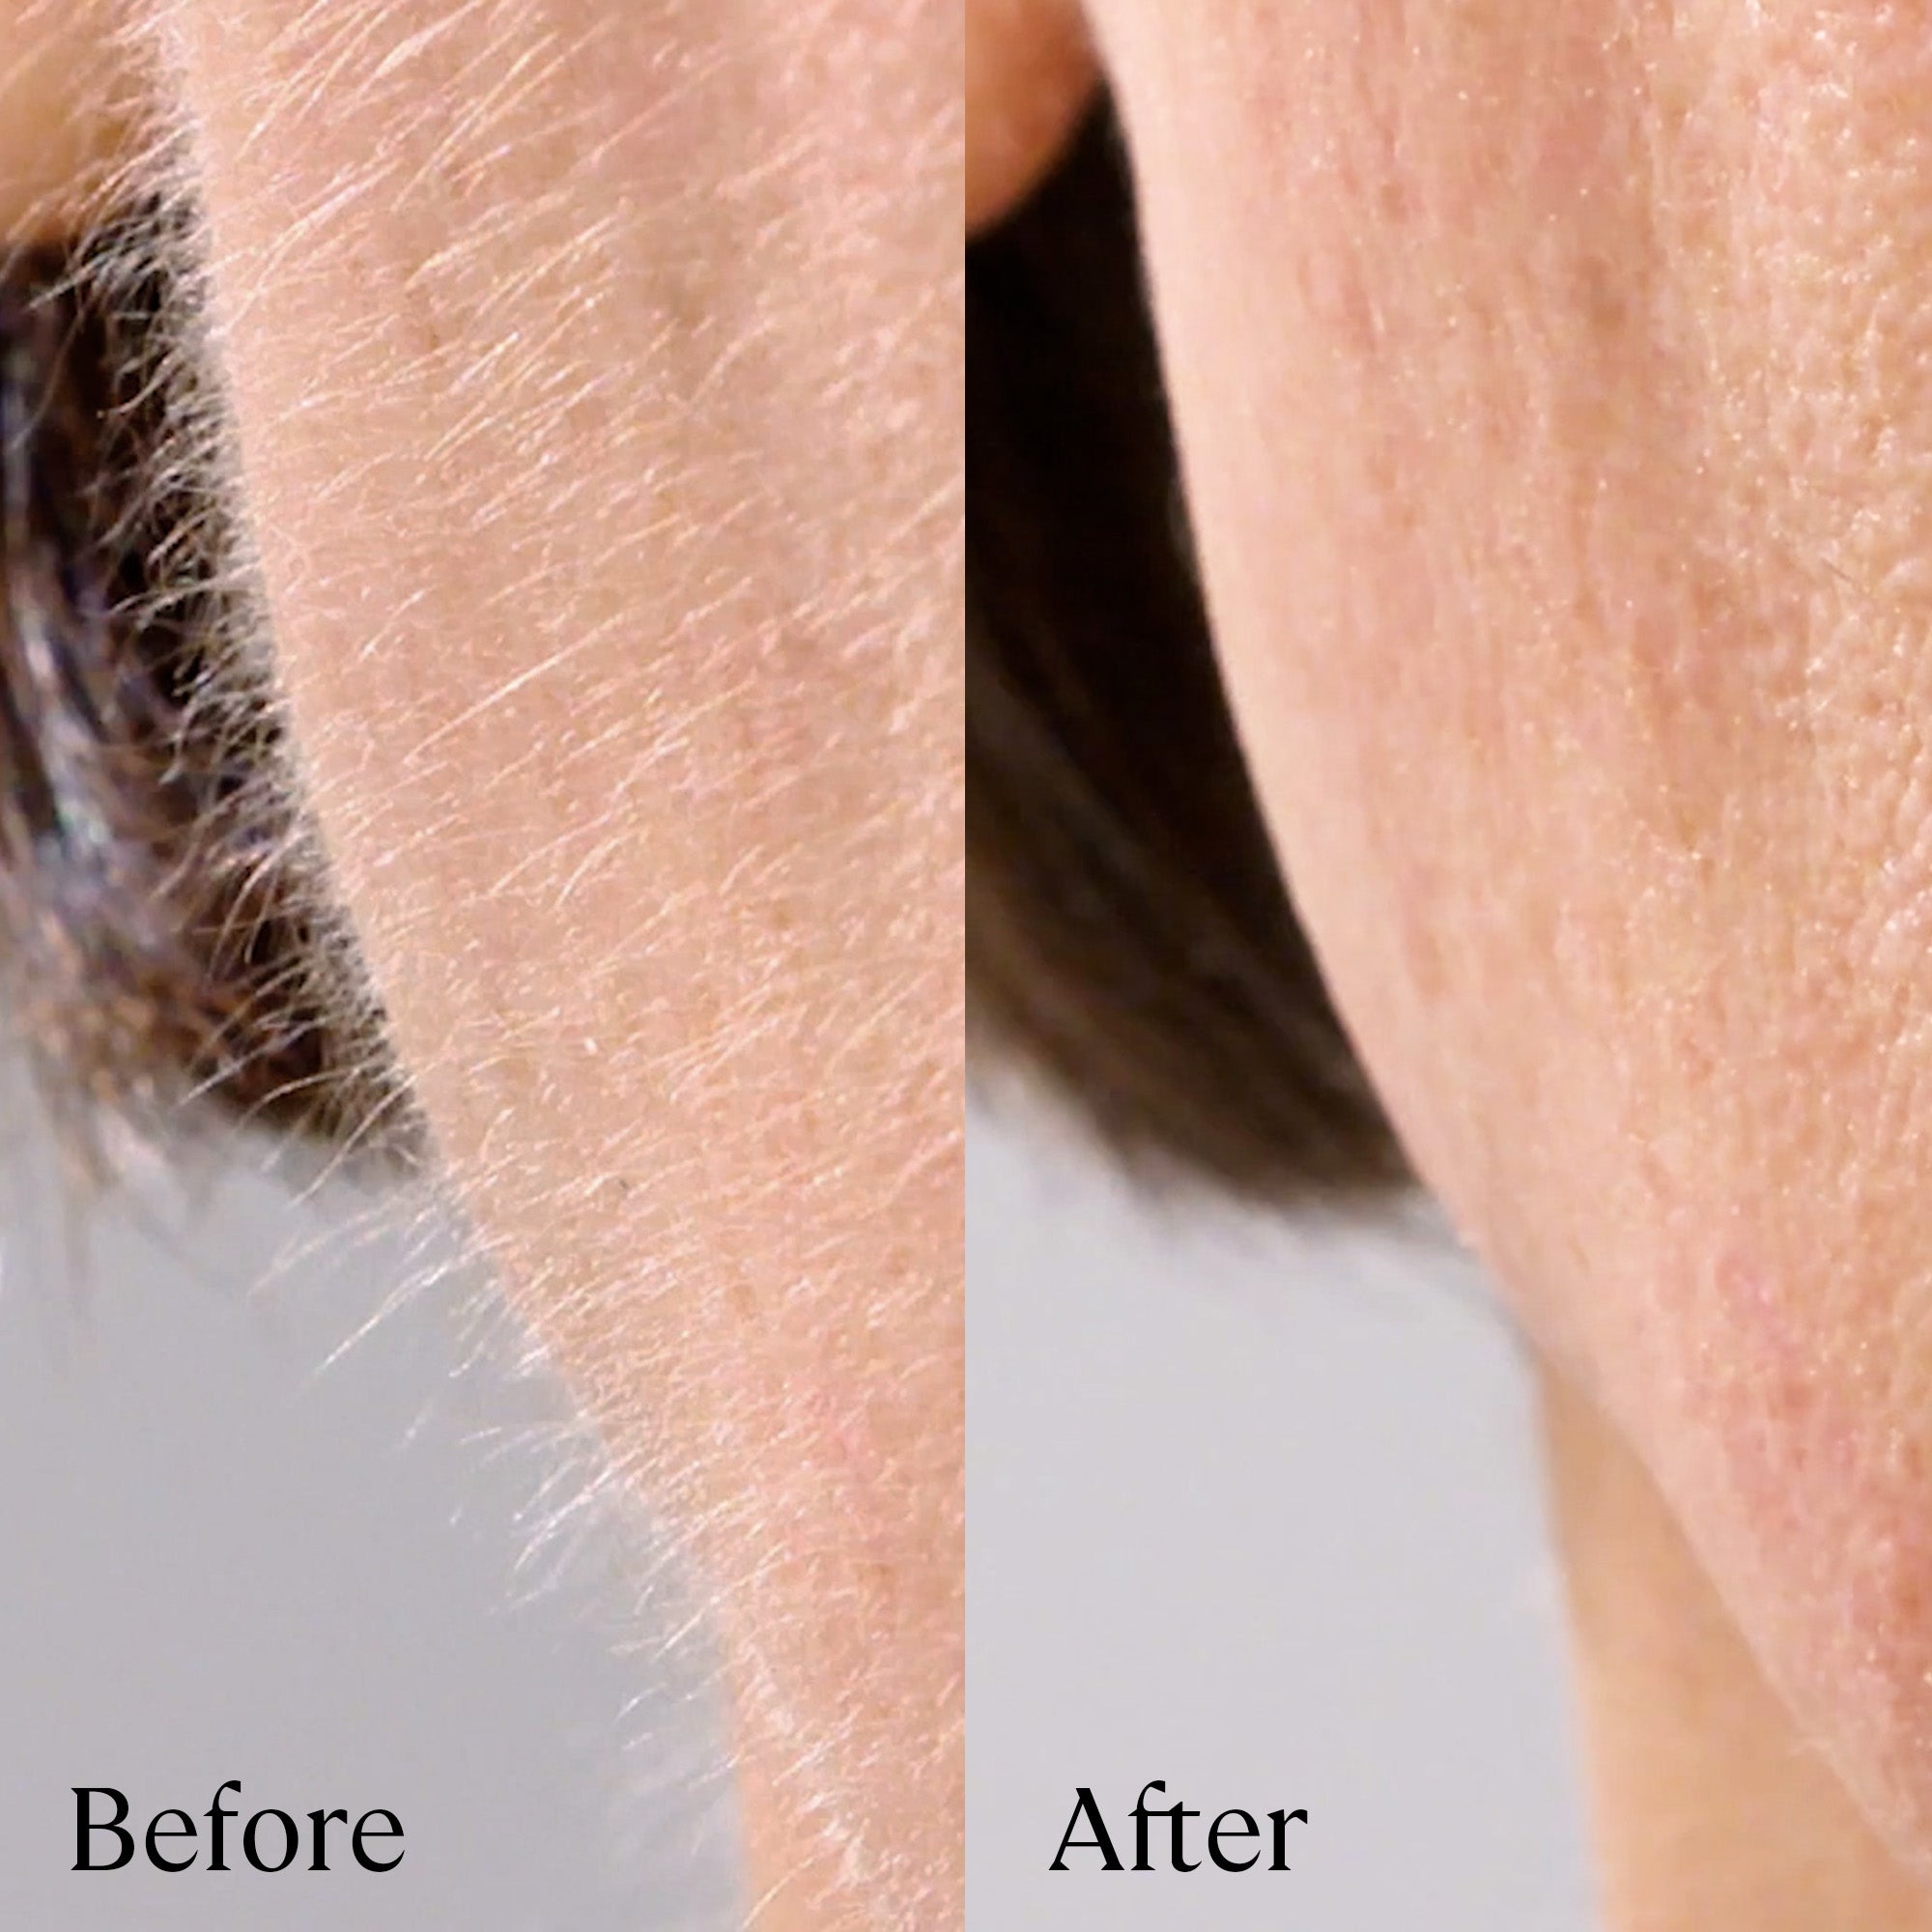 Lavender Lust . Close-up of an ear before and after hair removal, showing clear skin in the 'after' image compared to visible hair in the 'before' image using the Michael Todd Beauty 4 in 1 Dermaplaning & Post Treatment System.